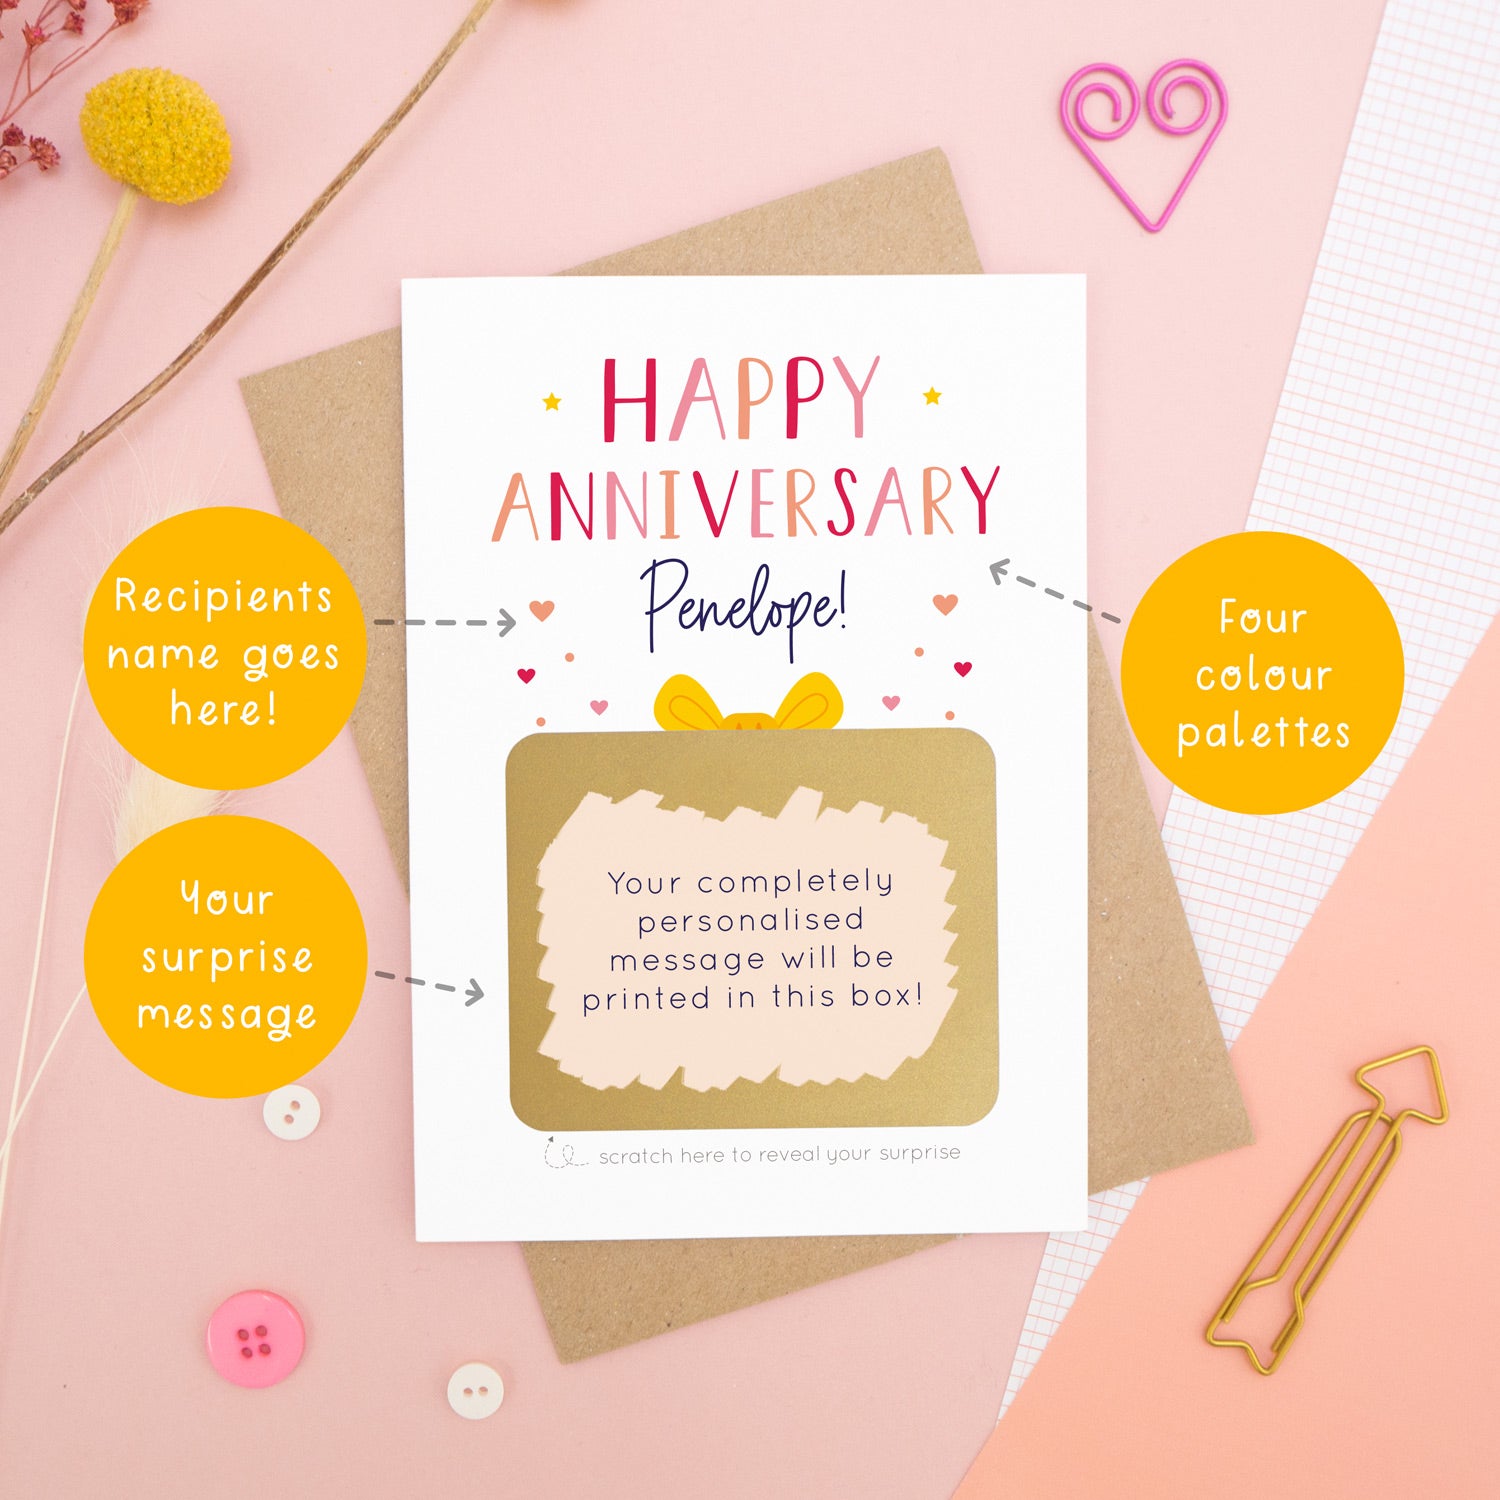 A personalised happy anniversary scratch card photographed on a pink background with floral props, paper clips, and buttons. The card has been scratched off to reveal the hidden message and is in the red and peach colour scheme. Around the card are circles of text pointing to the areas that can be changed (name, colour and personalised message).